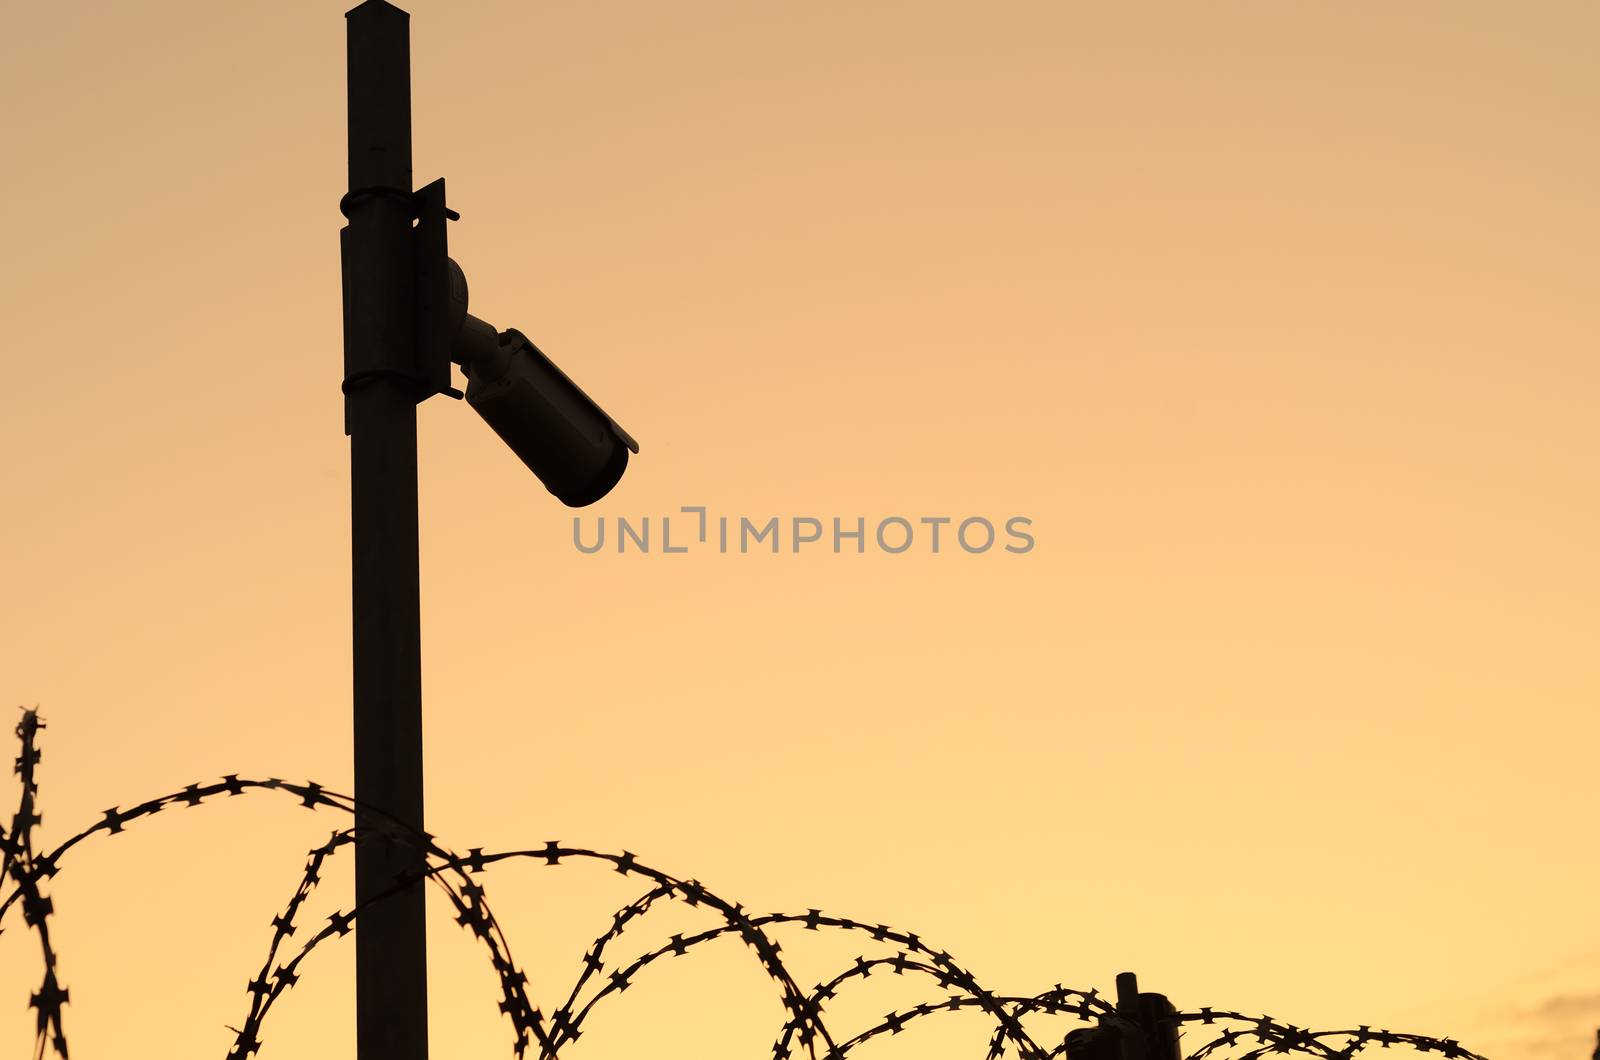 Silhouette of the Security camera on the pole on sunset.Observation of the perimeter of the protected area with barbed wire.Space for text